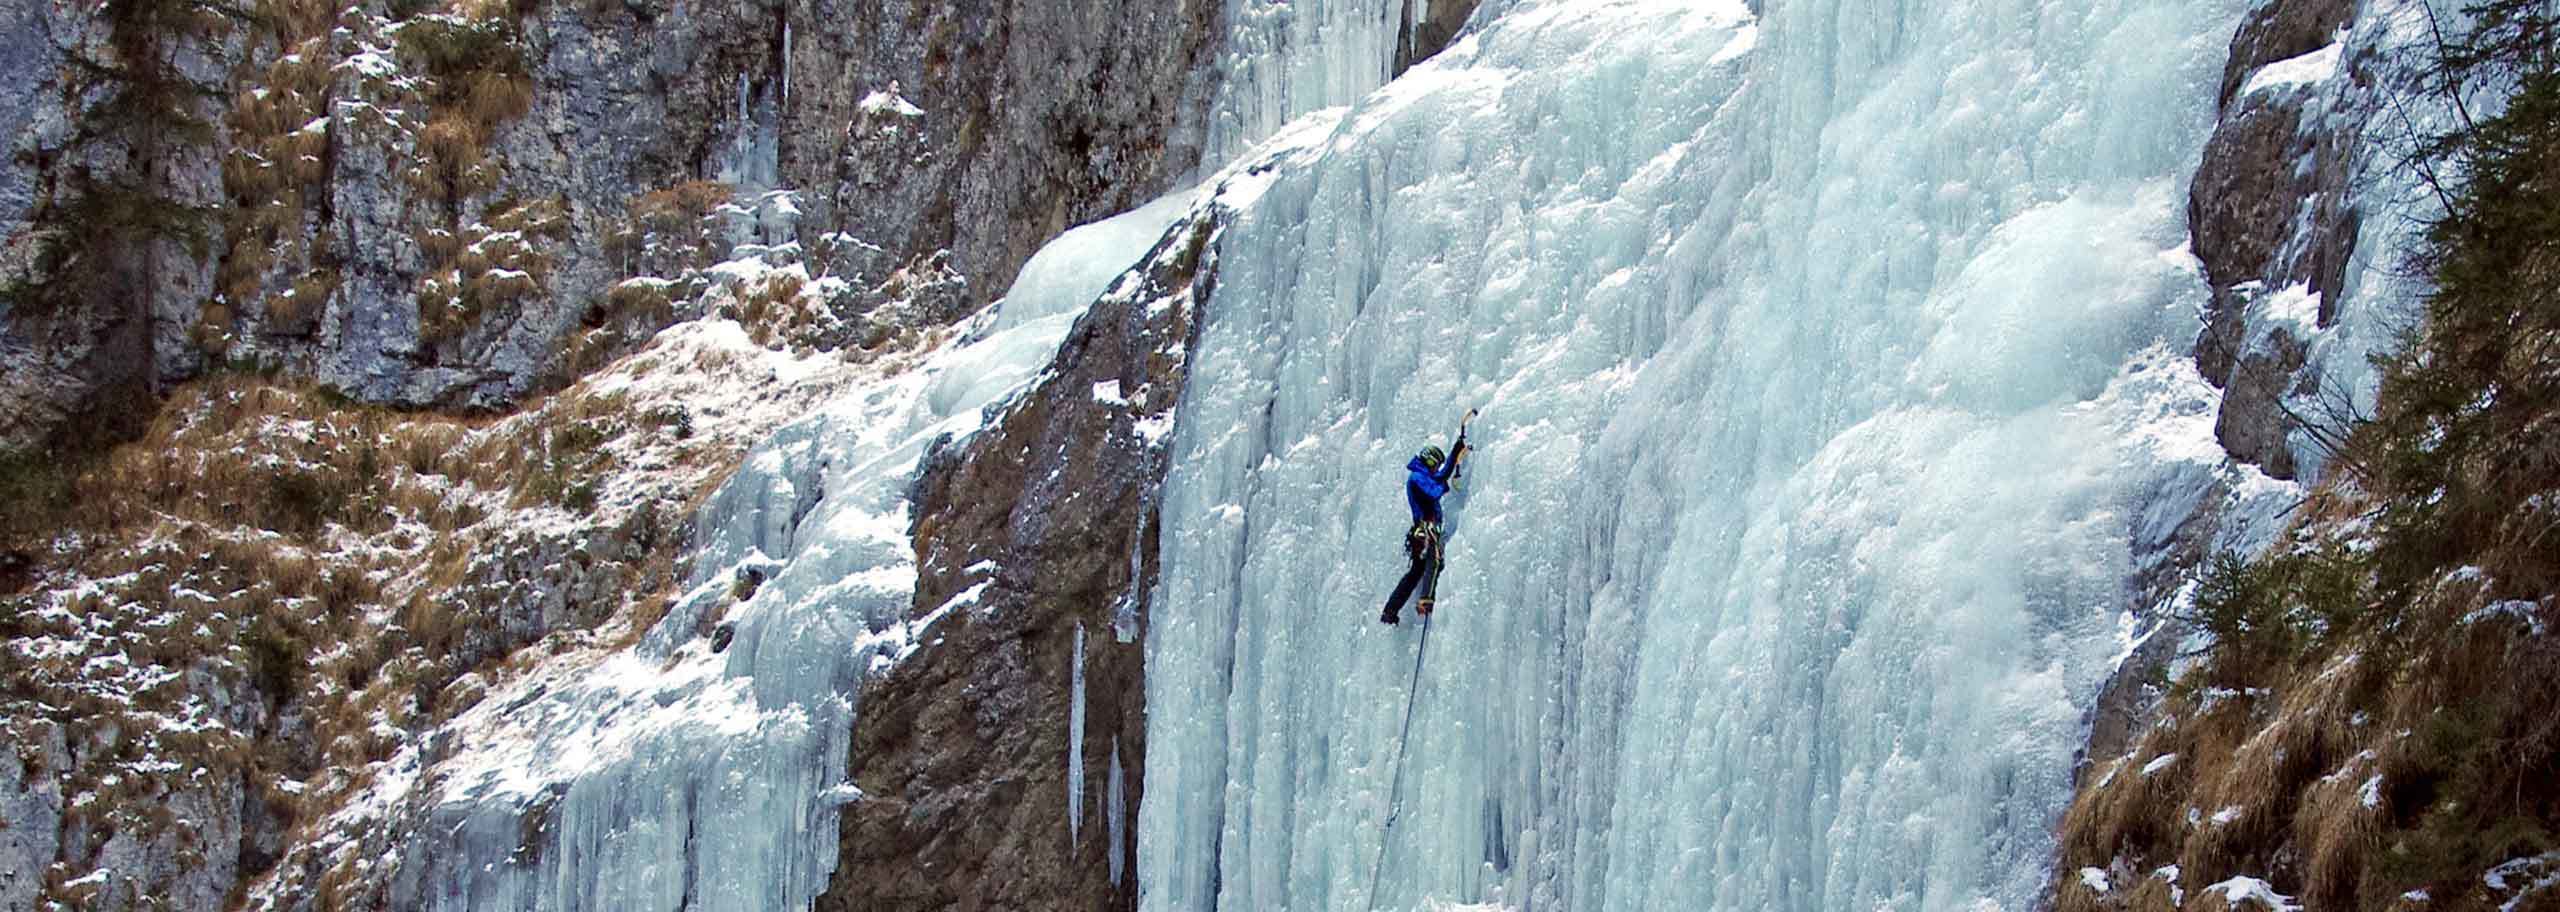 Ice Climbing in Val di Sole, Icefalls with a Mountain Guide